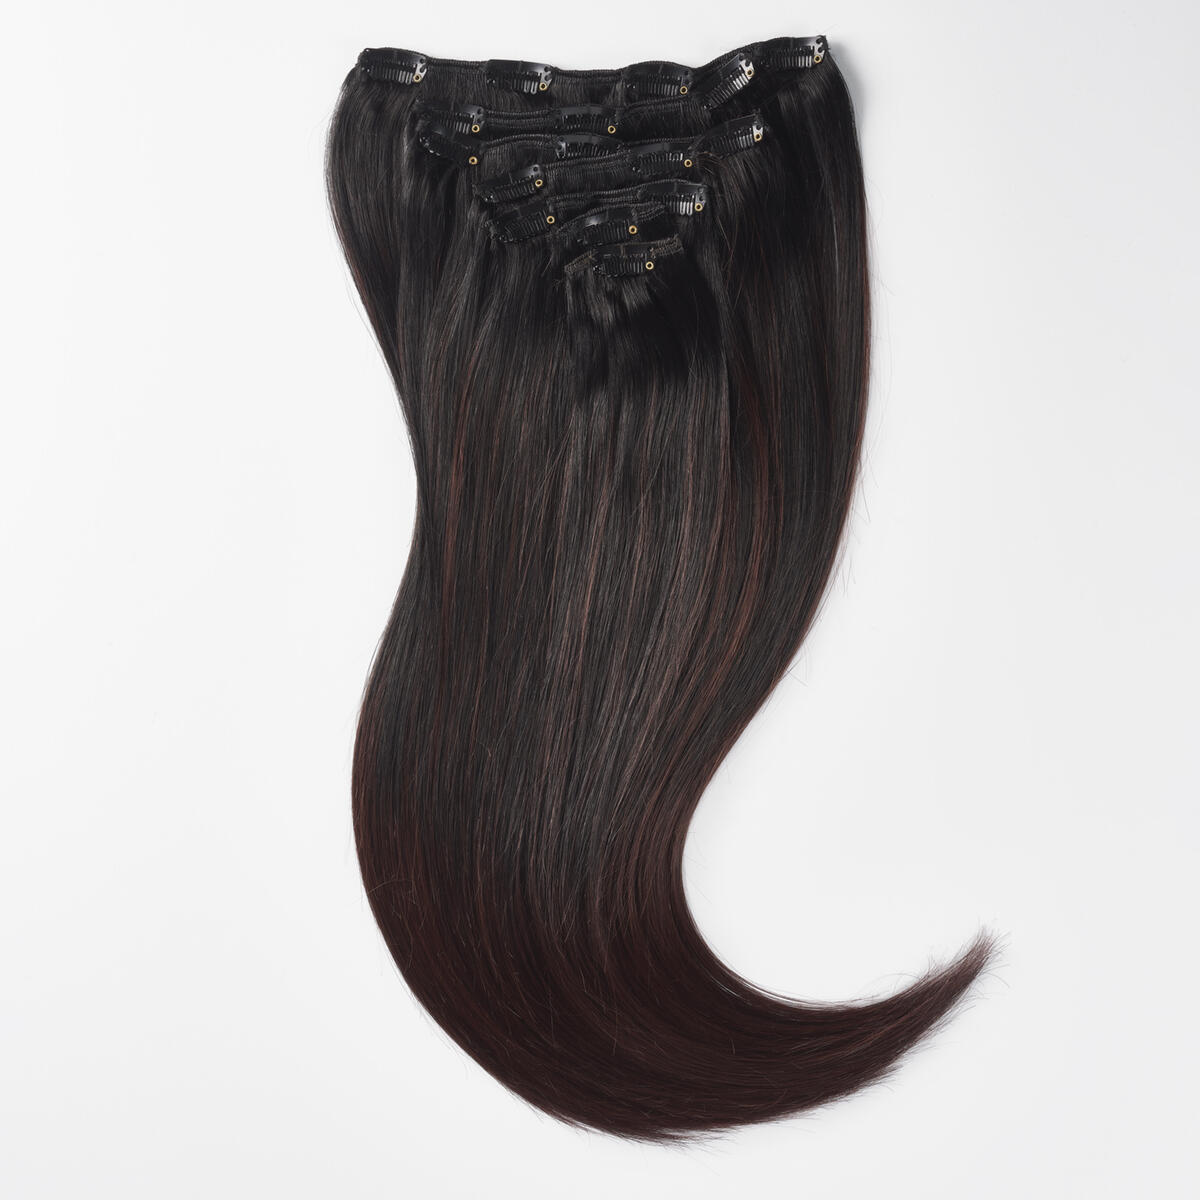 Clip-on set 7 pieces B1.0/6.12 Cherry Infused Black Balayage 50 cm